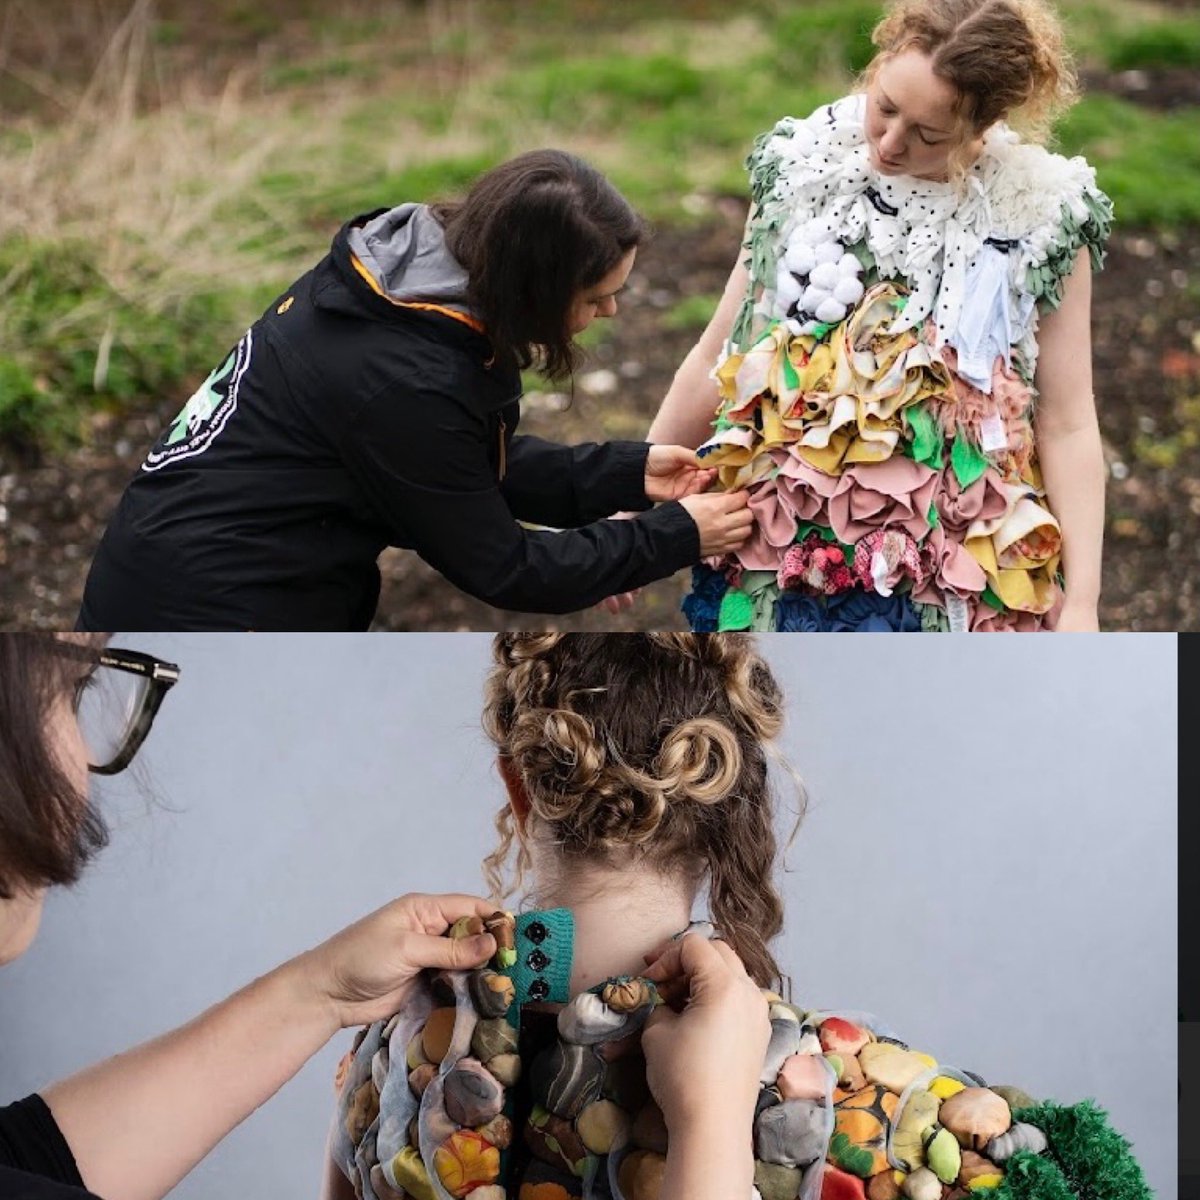 📣 INCREDIBLE artist Elly Platt (AKA @Takeitupwearit) 👗 and INSTINCTIVE Photographer Michael Shilling (@londonin360) 🎥 📸 
🌎 Collaboration 1) (Un)Natural/ DISCARDED and Collaboration 2) Spirit of the Wandle 🌊 which took place last month…
#dirtyrivers #ukwater